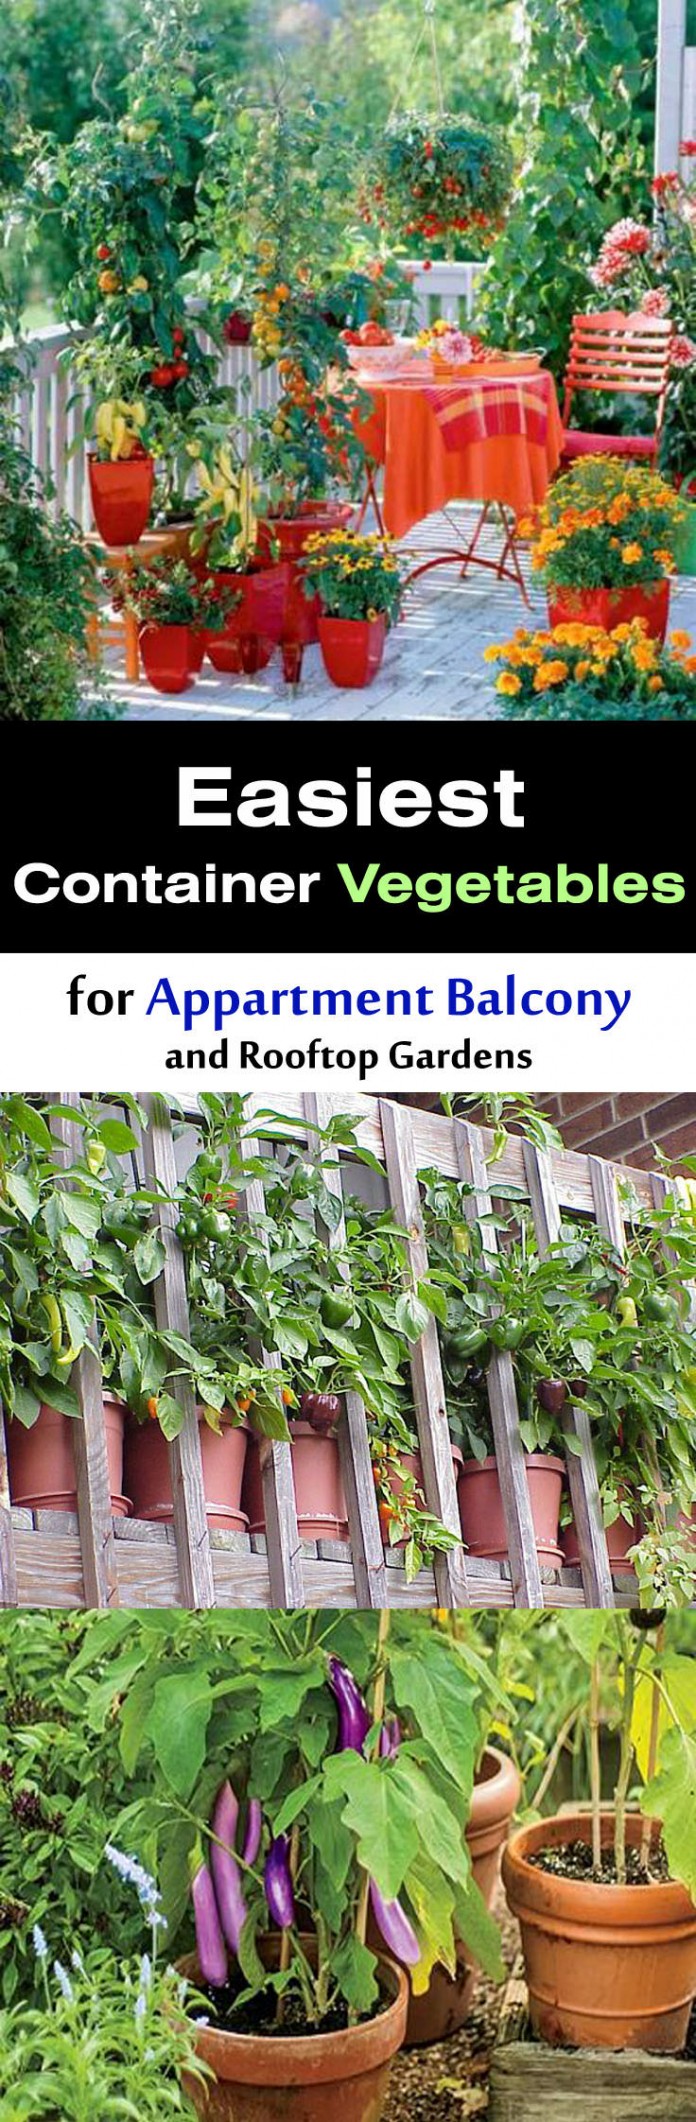 easiest-container-pot-vegetables-for-appartment-balcony-696x2122[1]